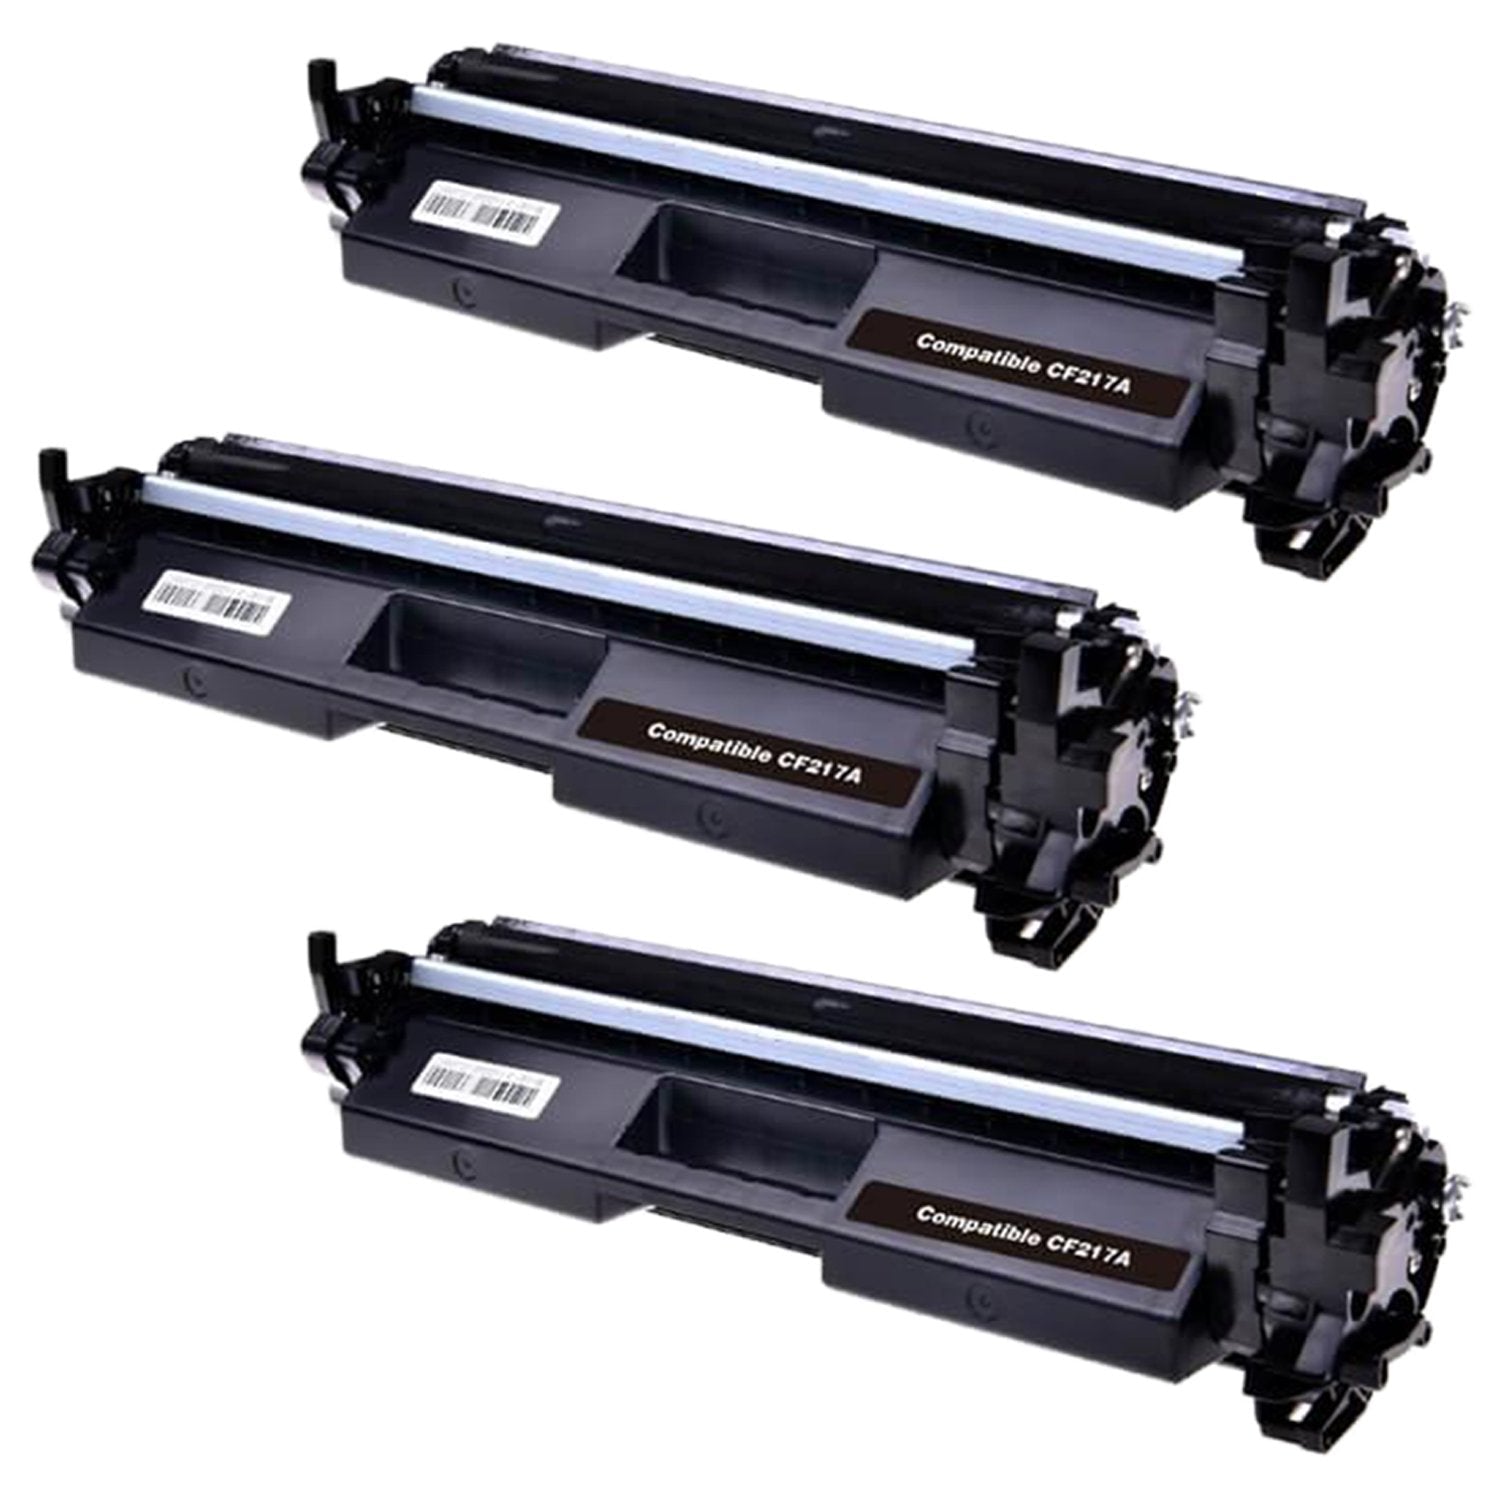 Absolute Toner Compatible CF217X HP 17X High Yield Black Toner Cartridge | Absolute Toner HP Toner Cartridges